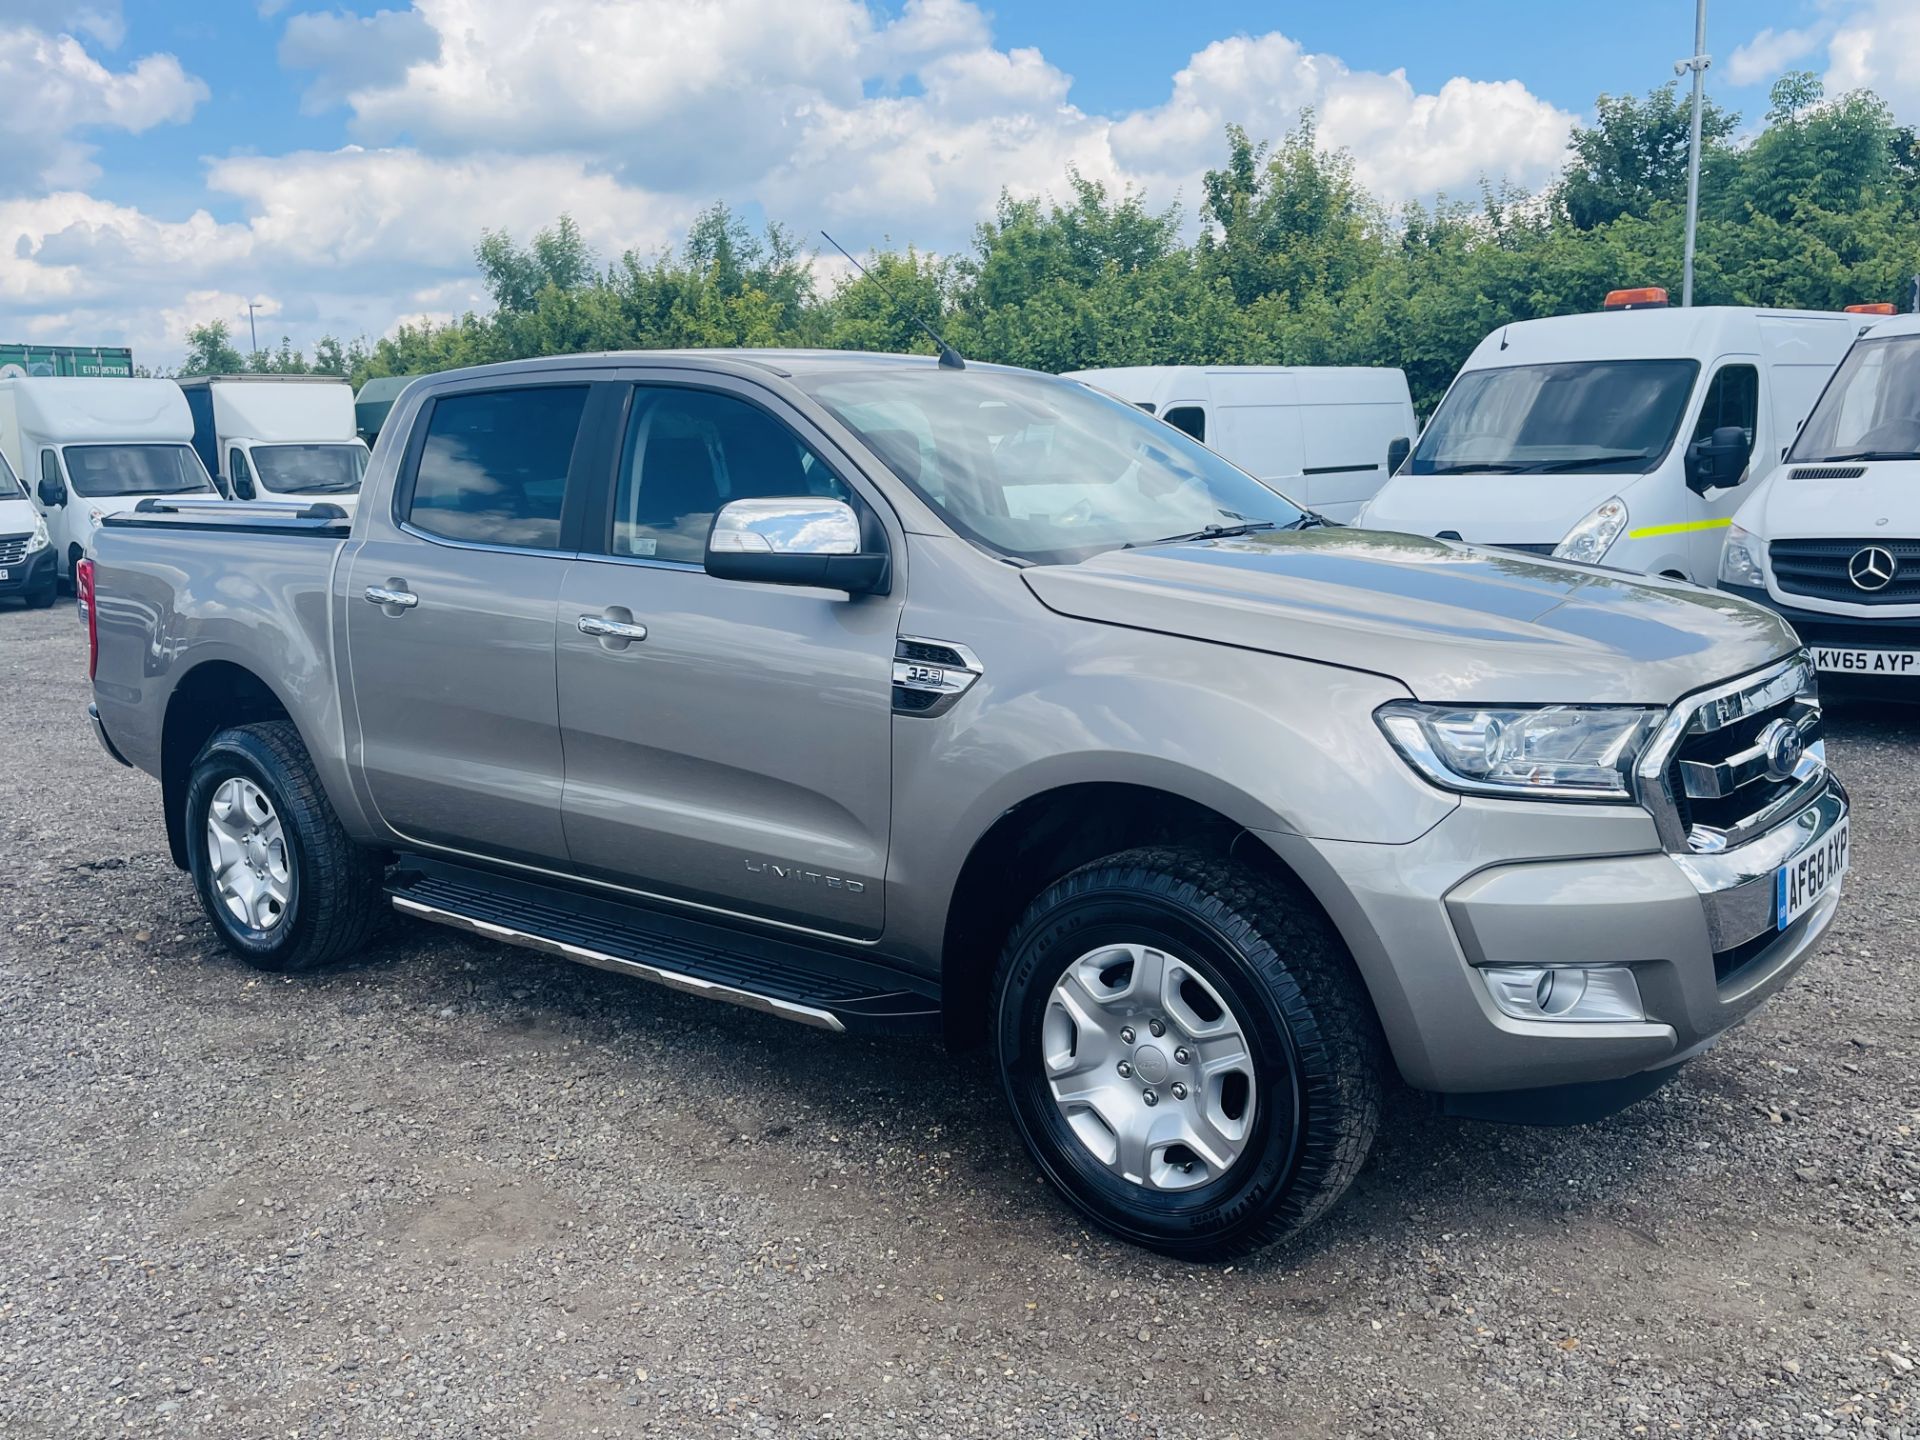 ** ON SALE ** Ford Ranger 3.2 TDCI Limited 2018 '68 Reg' Auto 4WD - Sat Nav - A/C - Euro 6 - Image 15 of 35